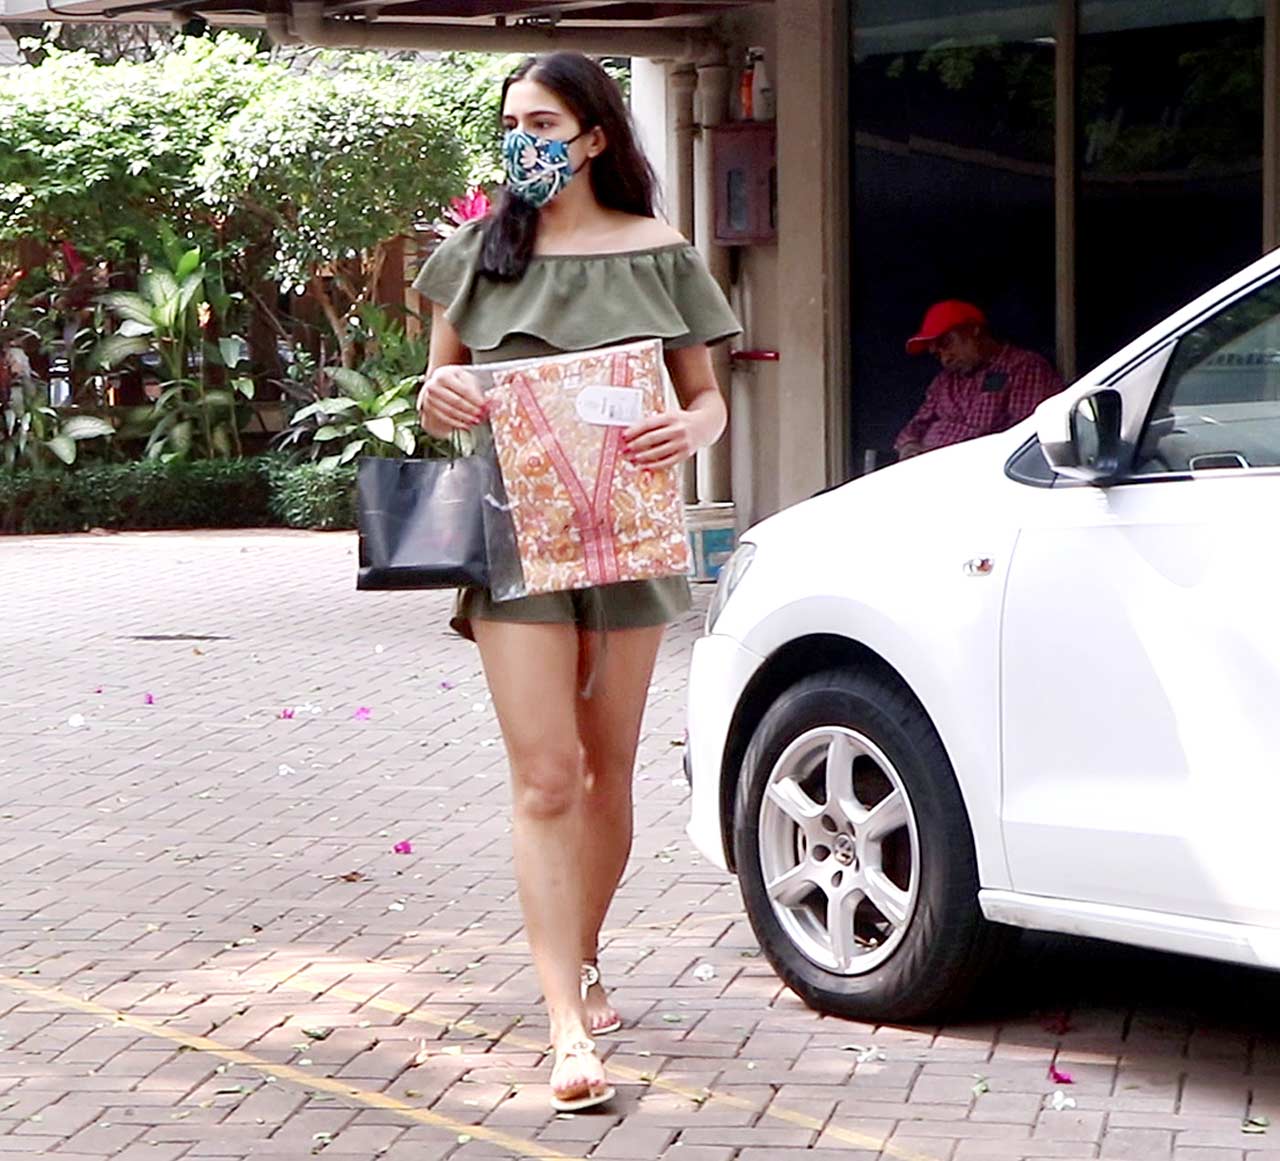 Sara Ali Khan sizzled in her green crop top and shorts. She completed her look with a black handbag.